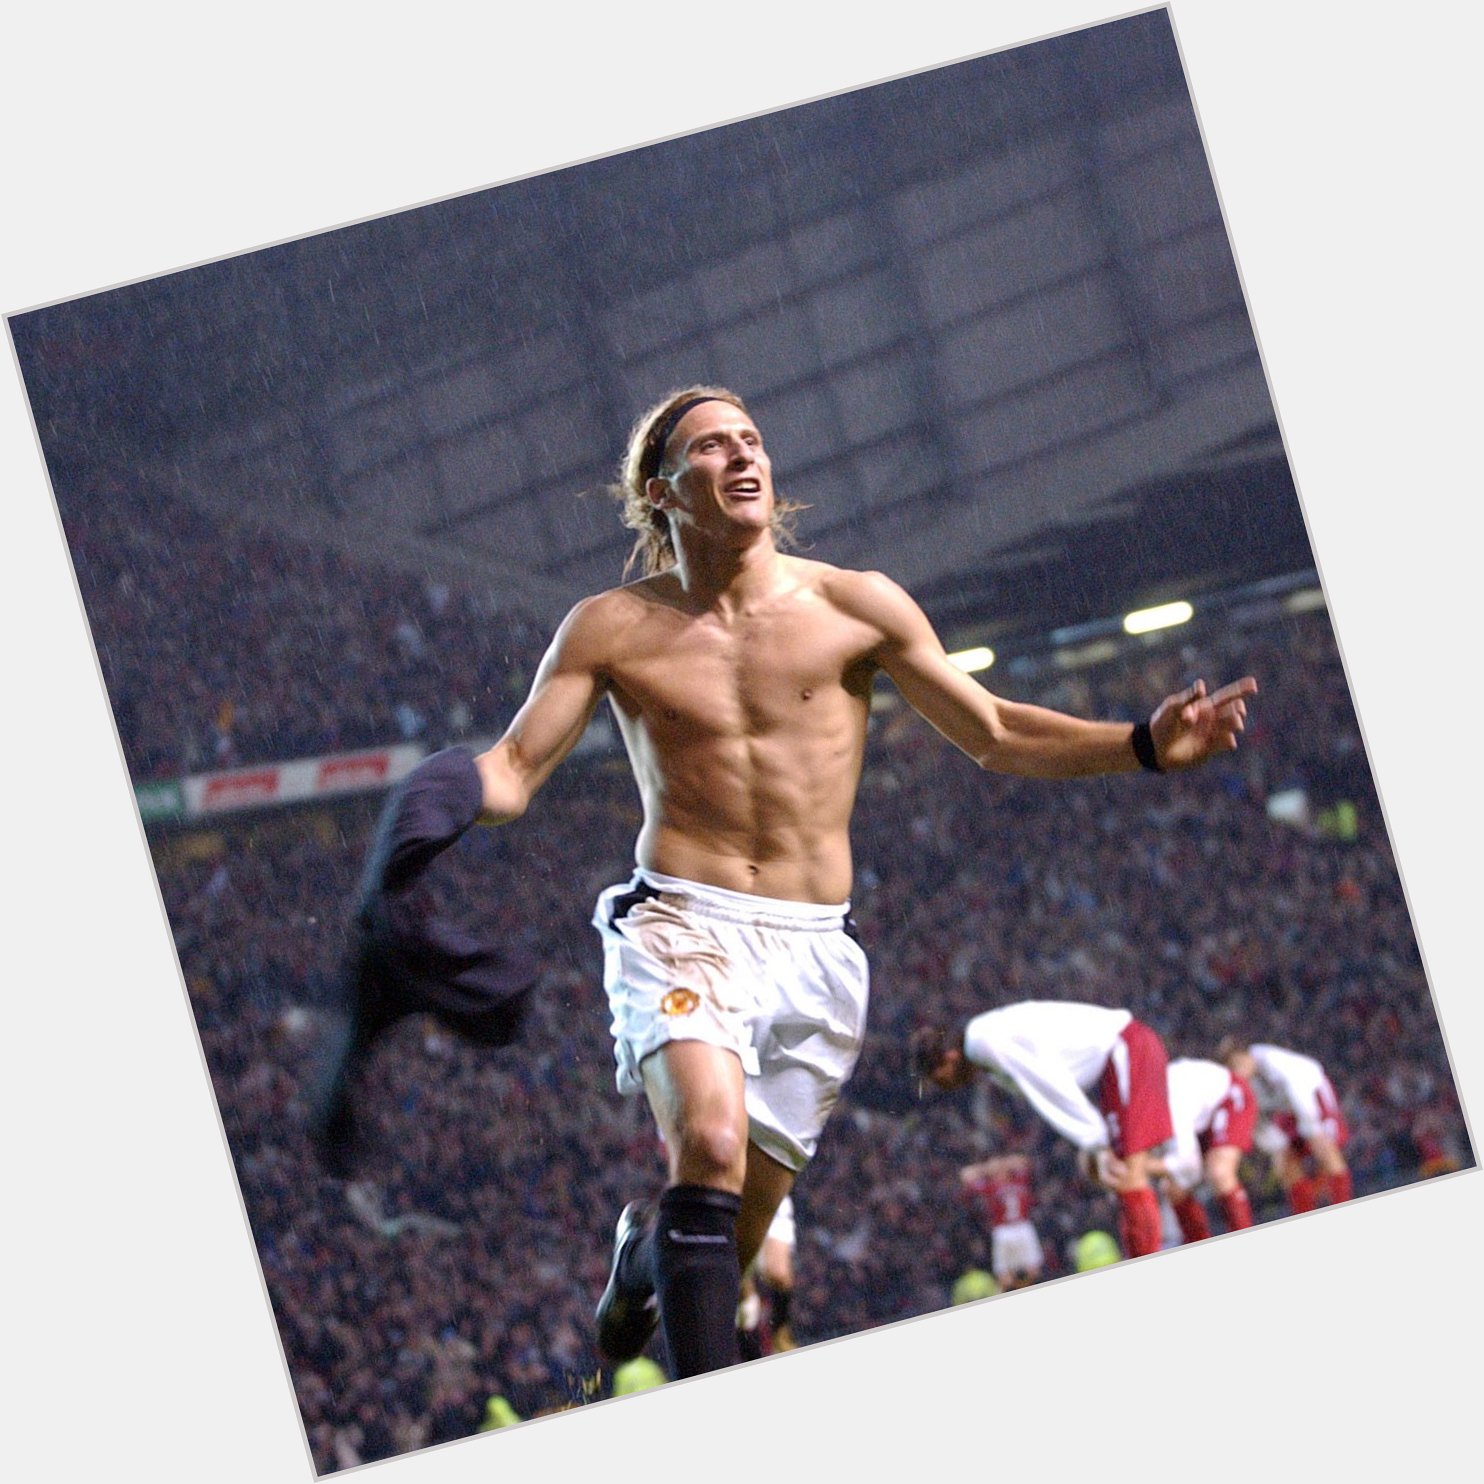 Happy Birthday to Diego Forlan. Throwback to him running around Old Trafford with his shirt off. True baller 